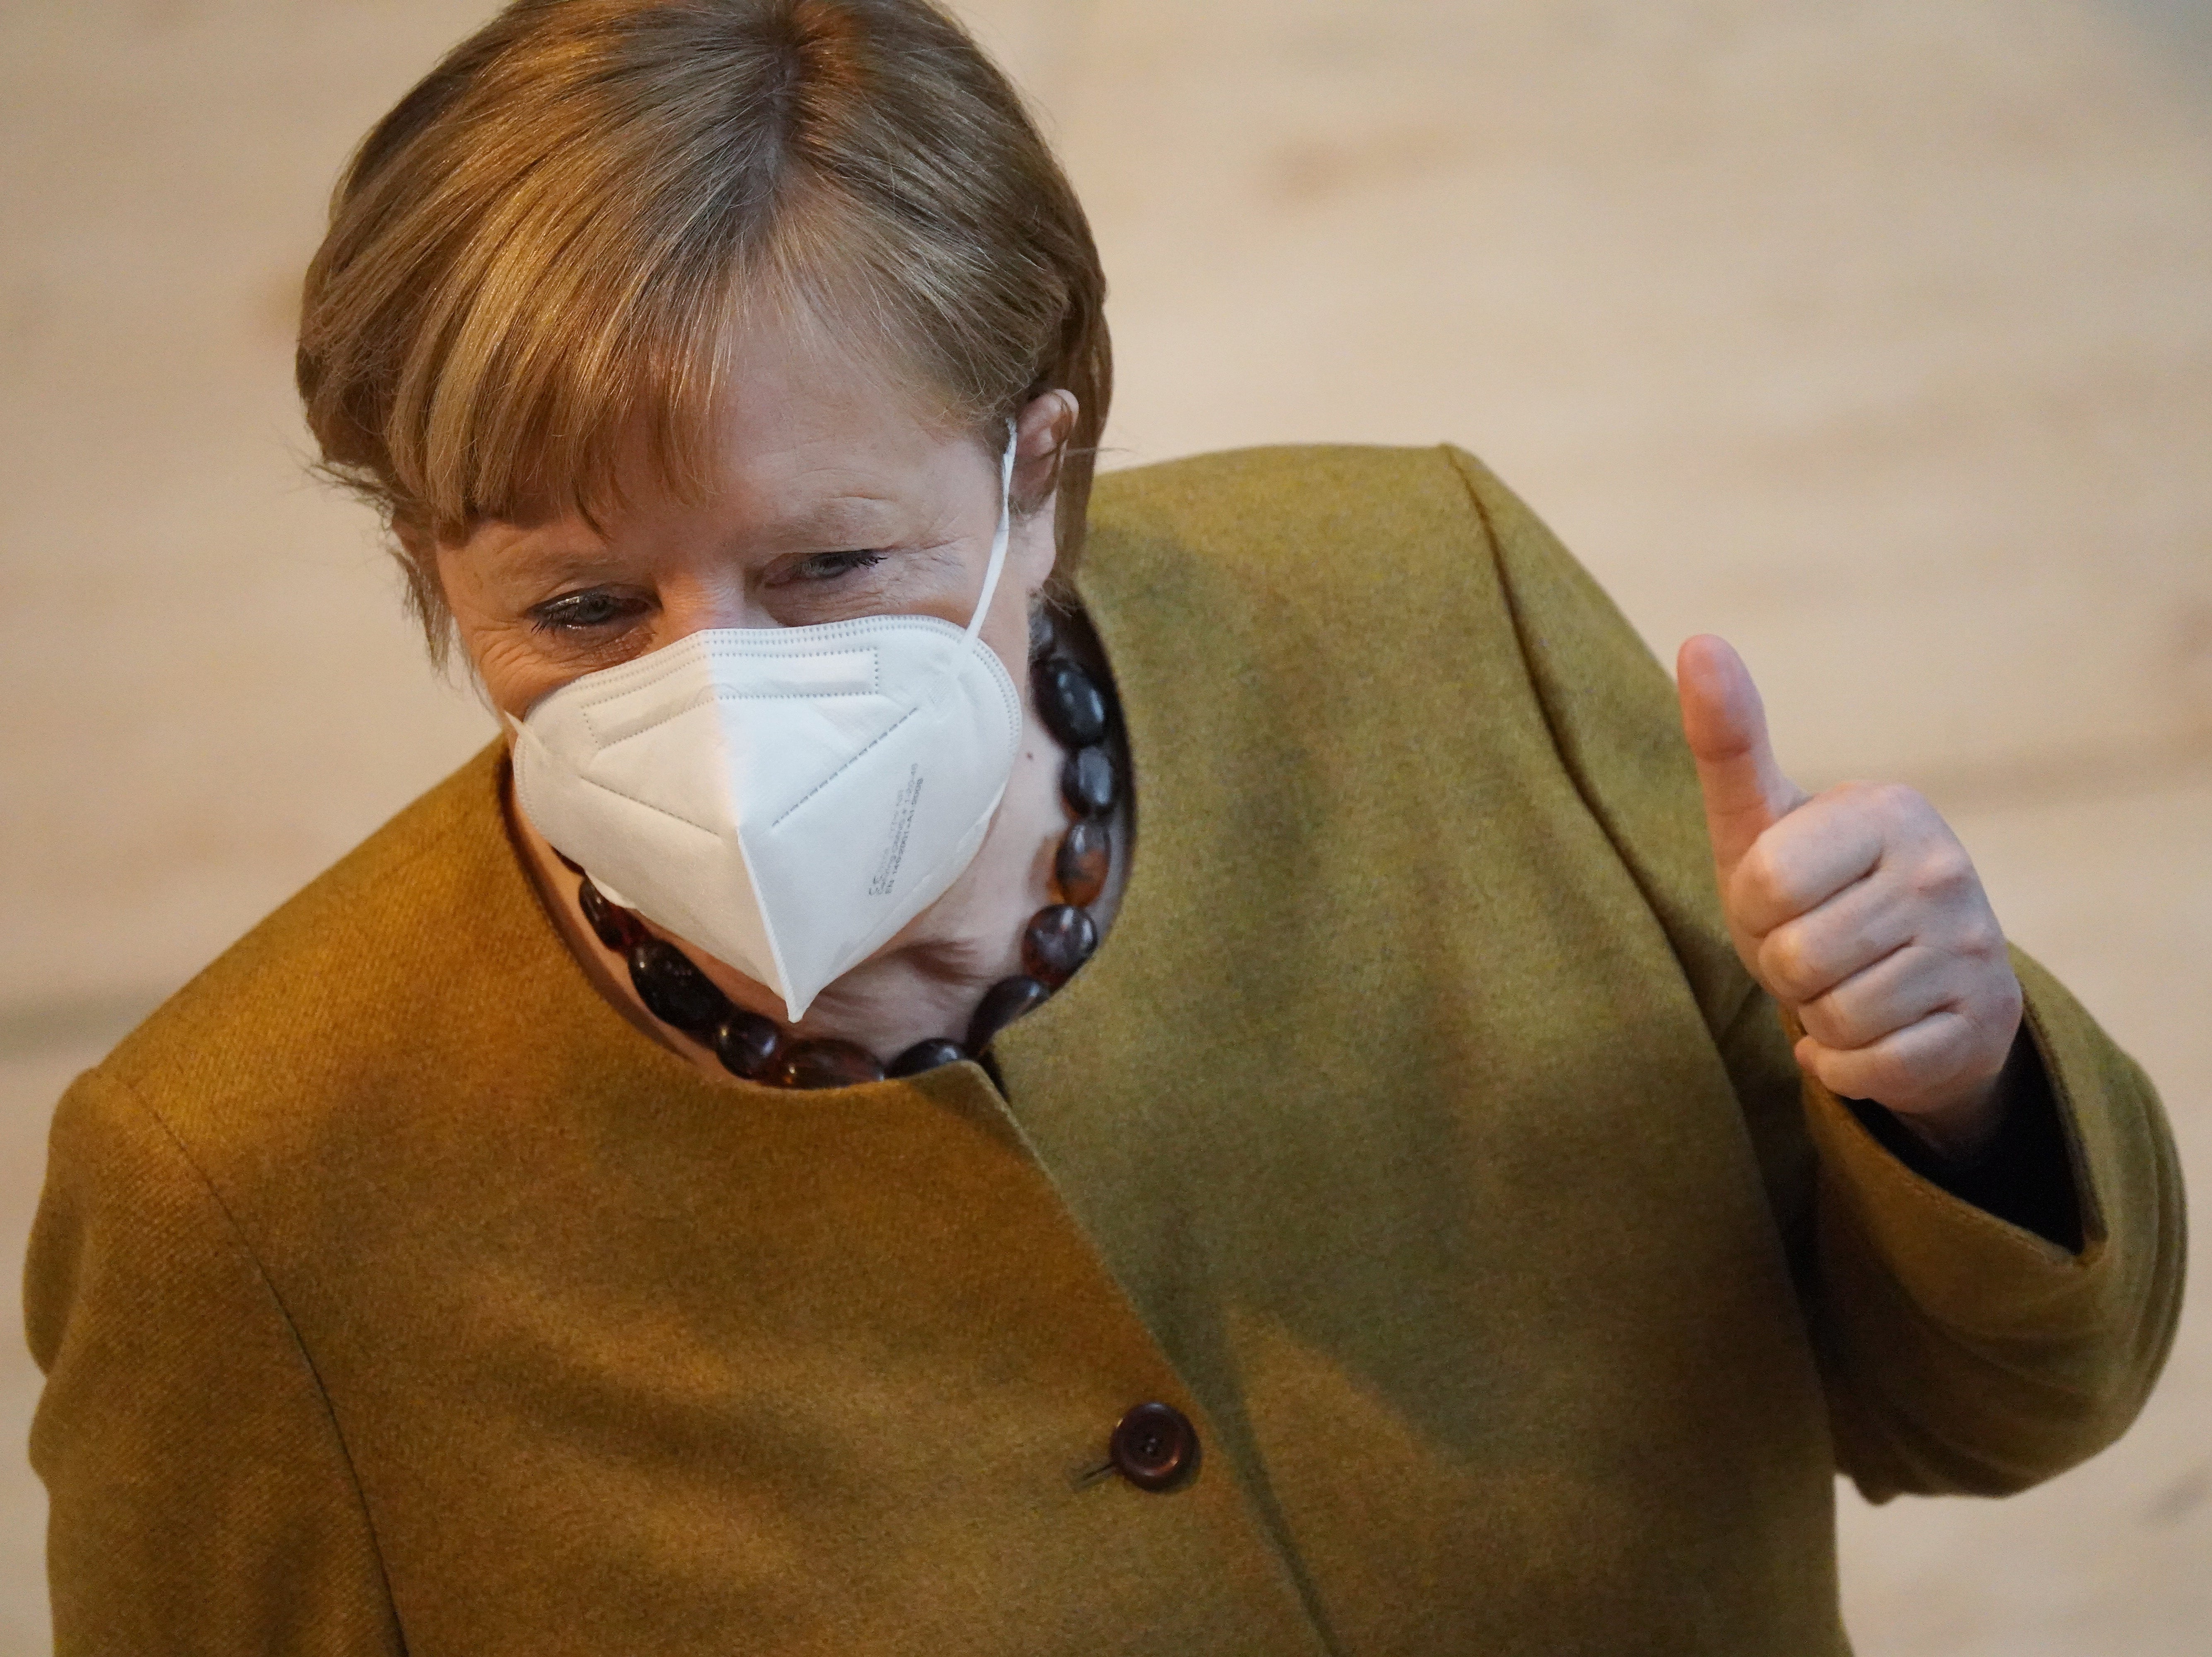 Angela Merkel, whose government had previously said it lacked evidence the jab would be effective